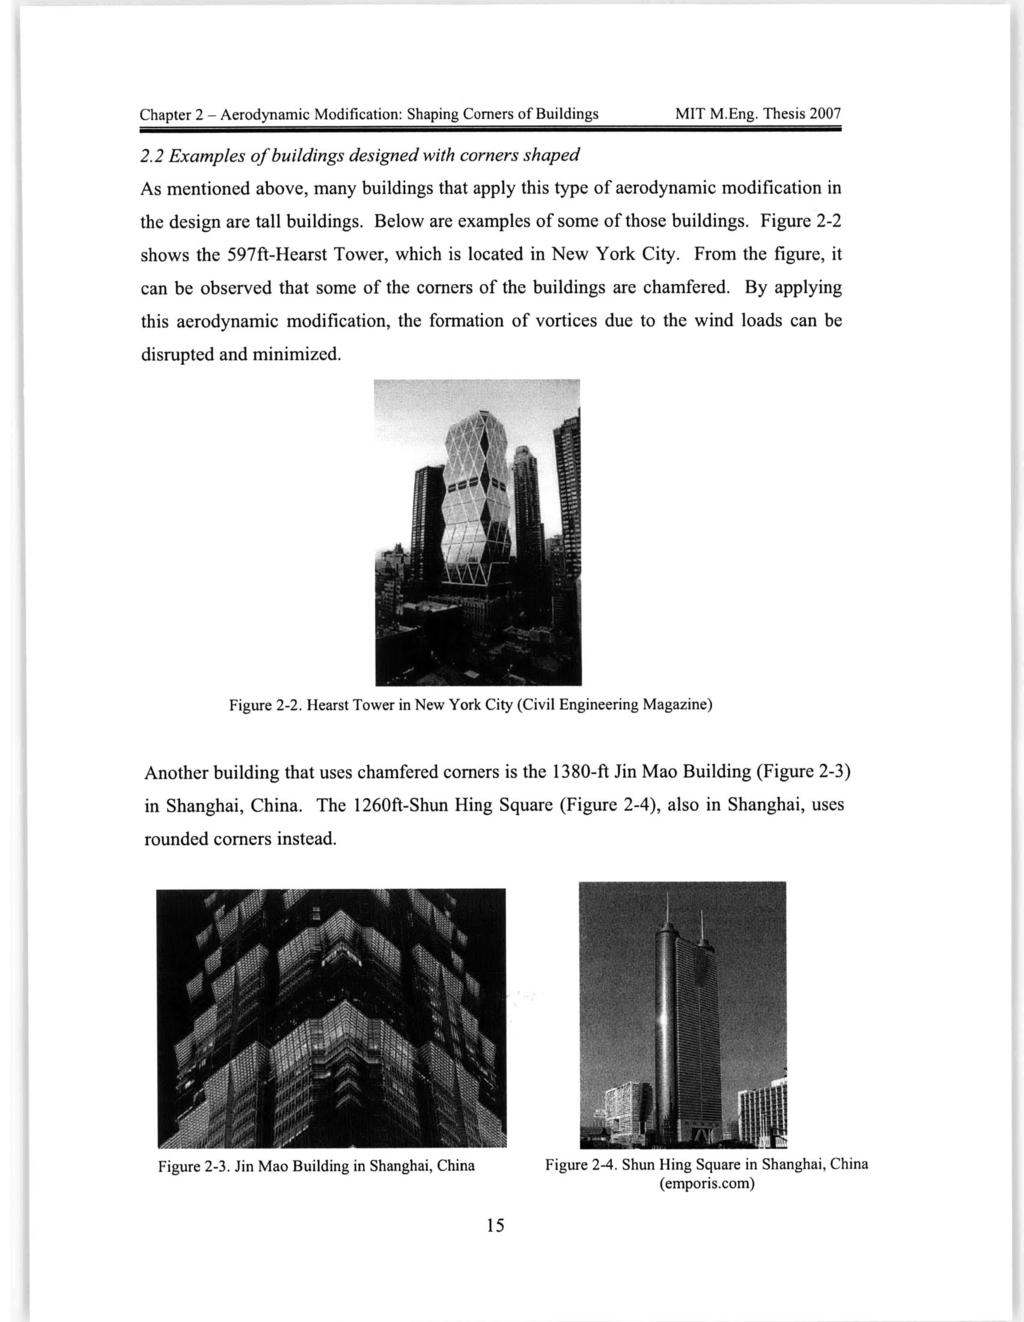 Chapter - Aerodynamic Modification: Shaping Corners of Buildings MIT M.Eng. Thesis 007.